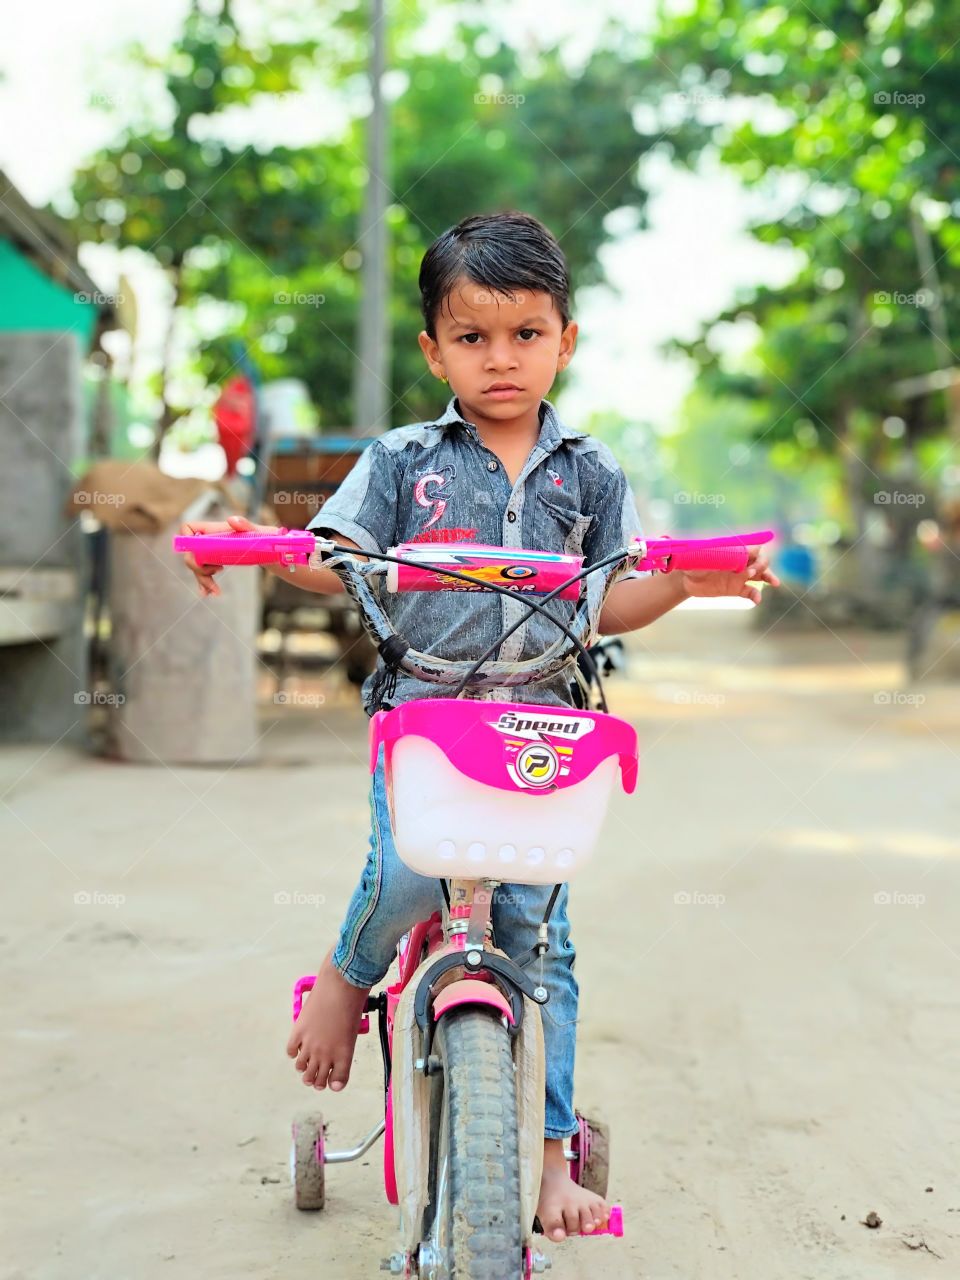 A small boy sitting on small cycle with facial expressions..